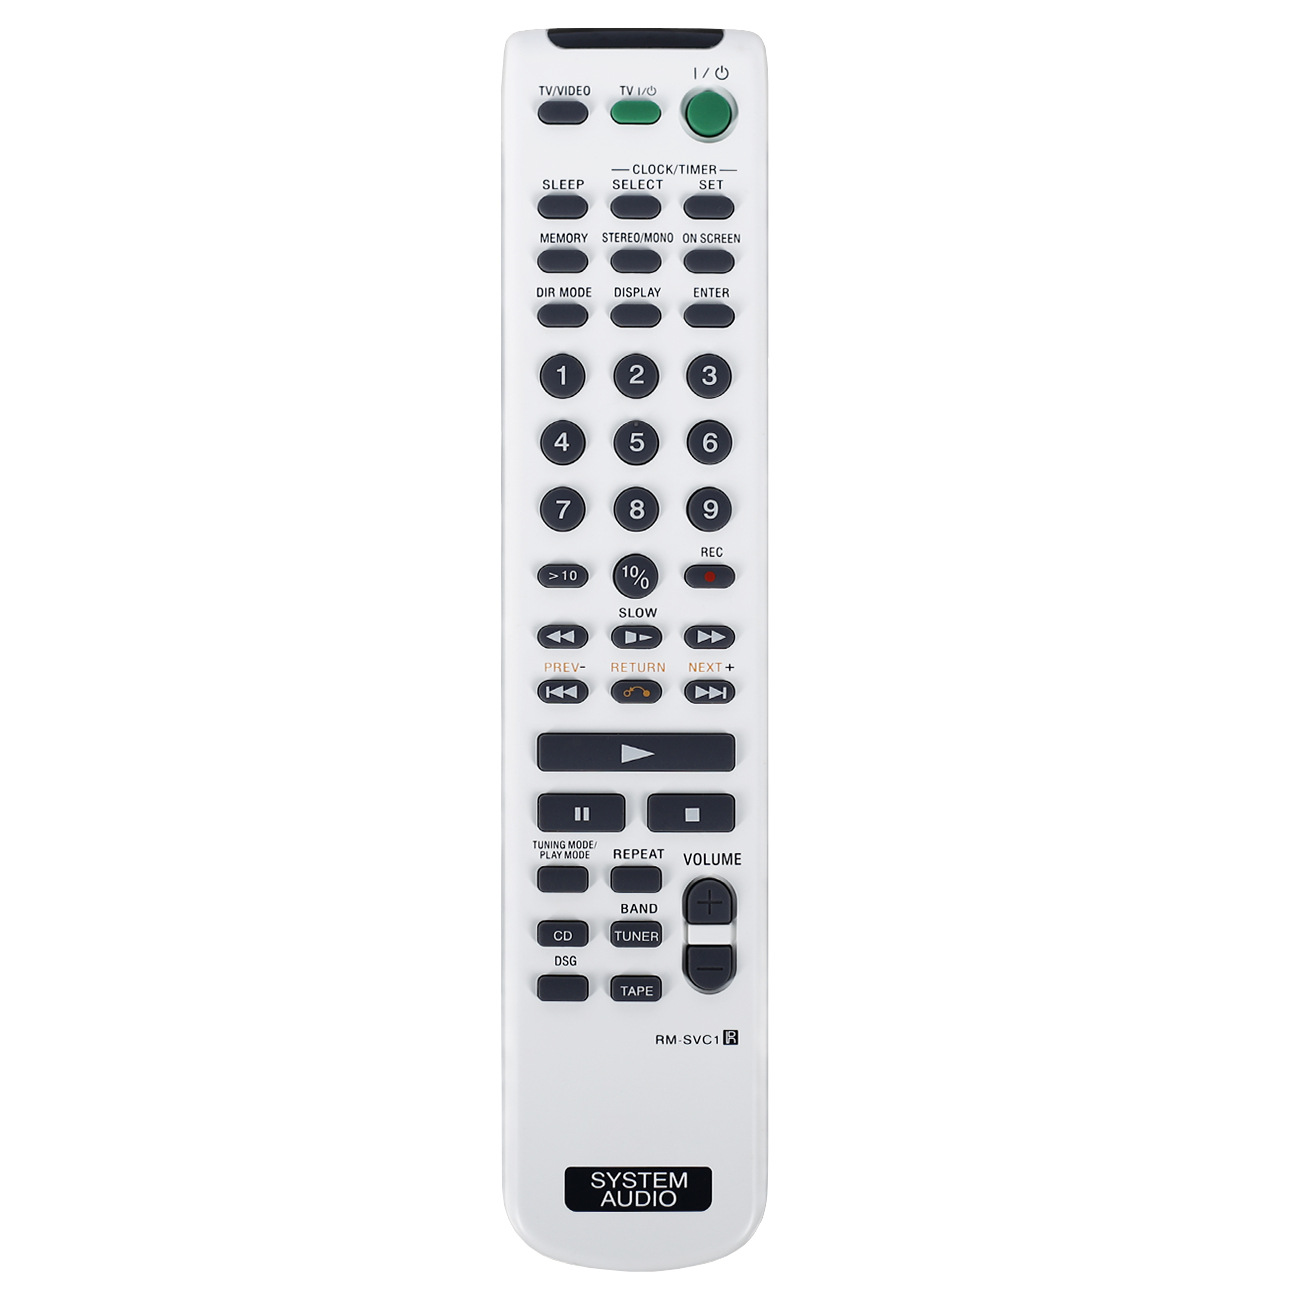 

High Quality Speaker Remote Control RM-SVC1 for Sony Speaker